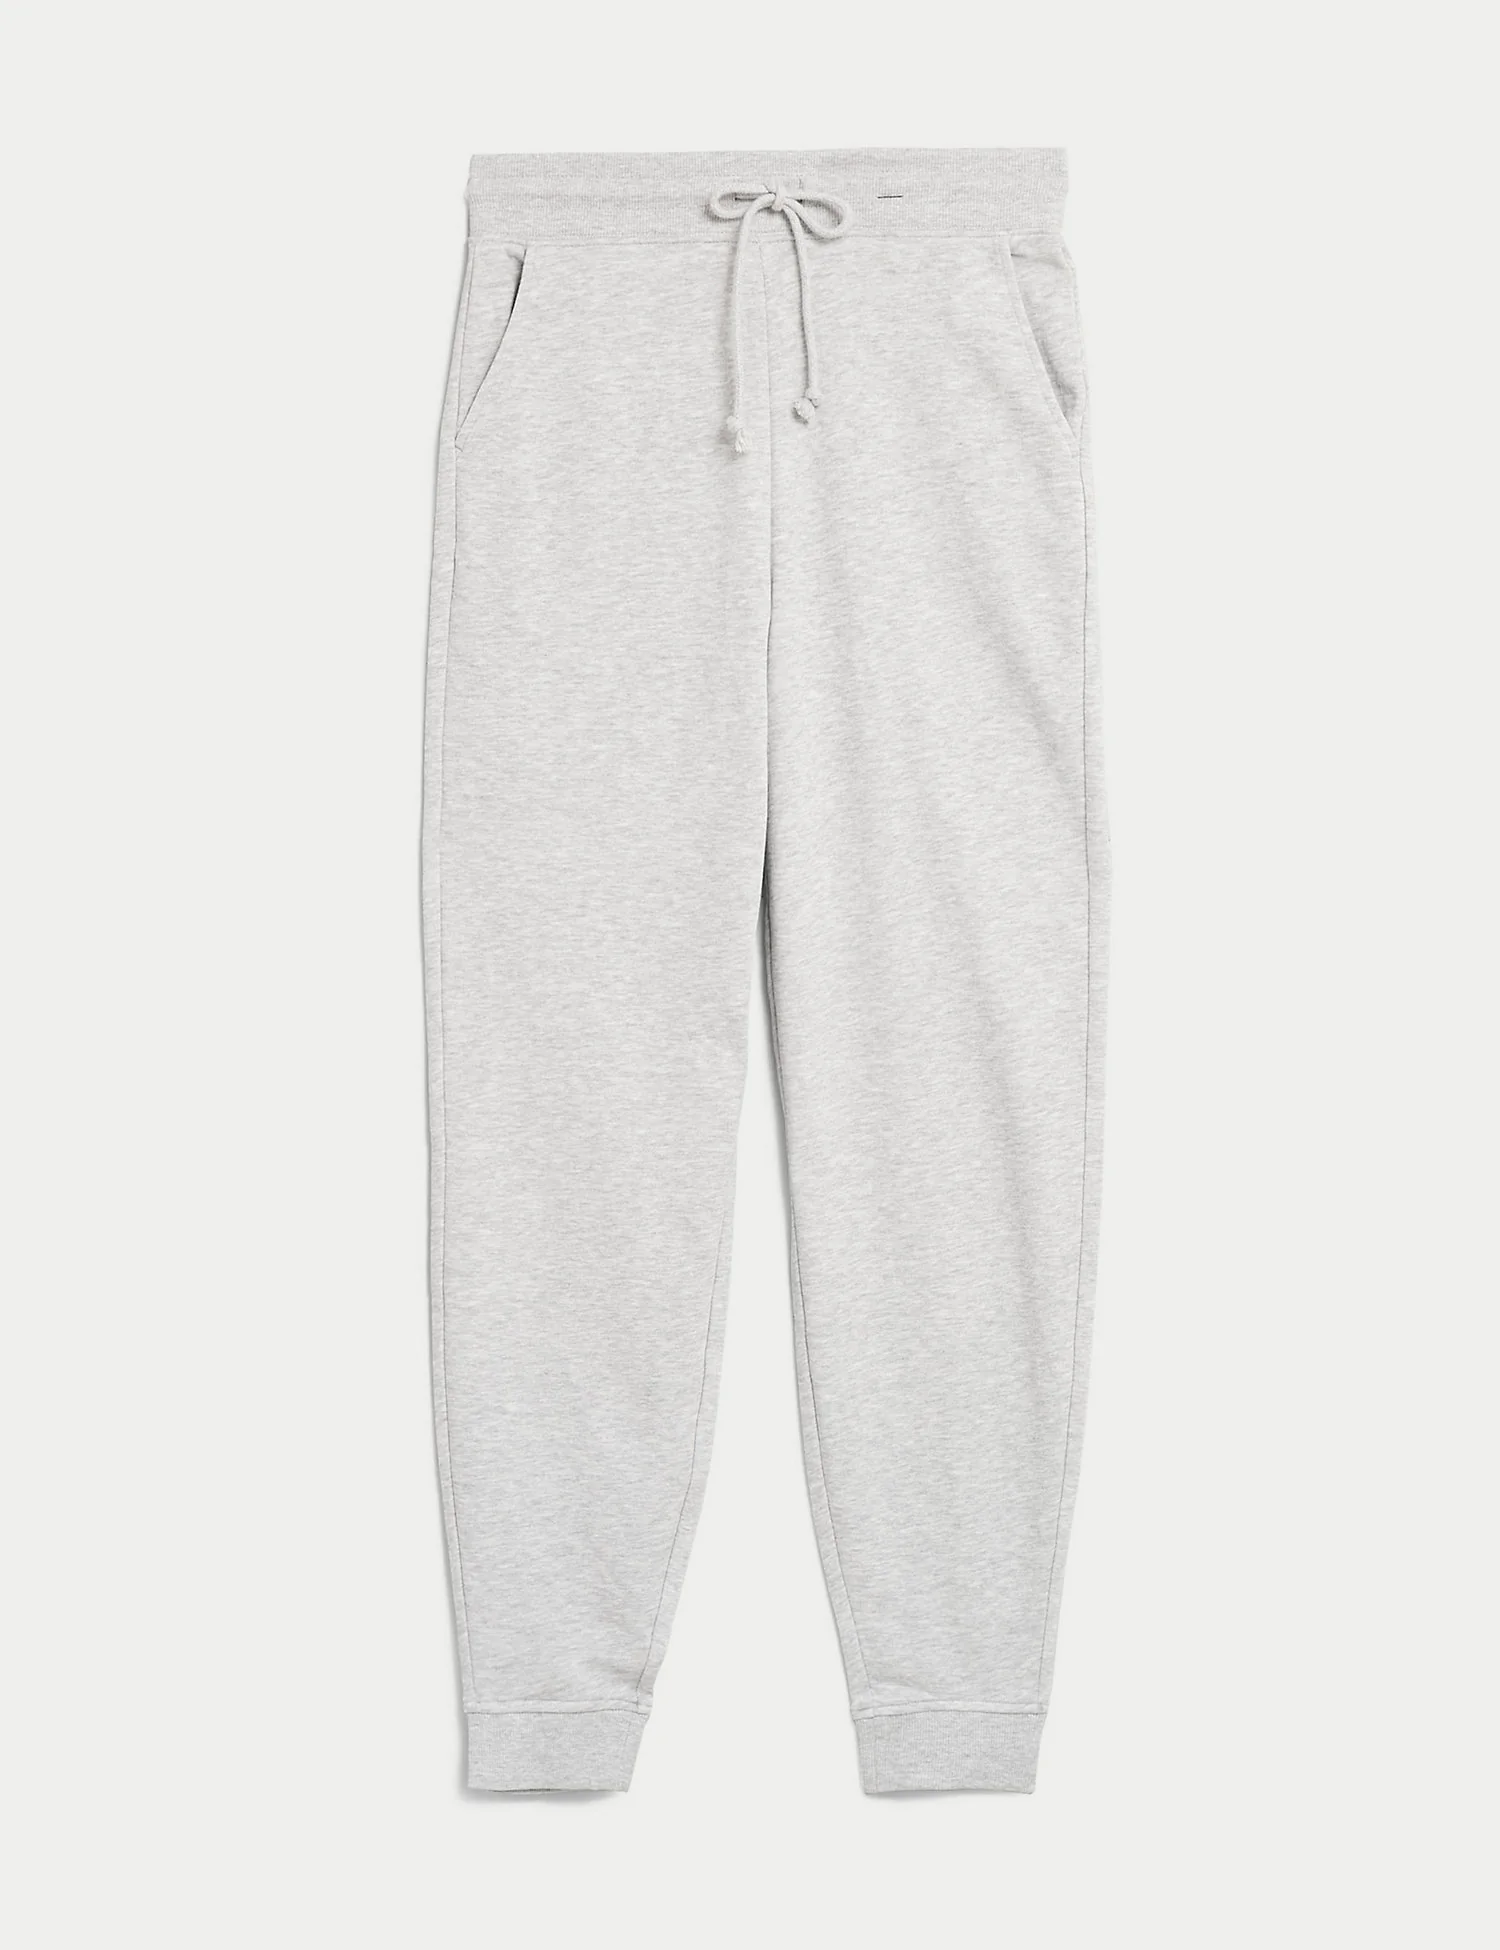 The Cotton Rich Cuffed Joggers - P1315 from 1550.jpg